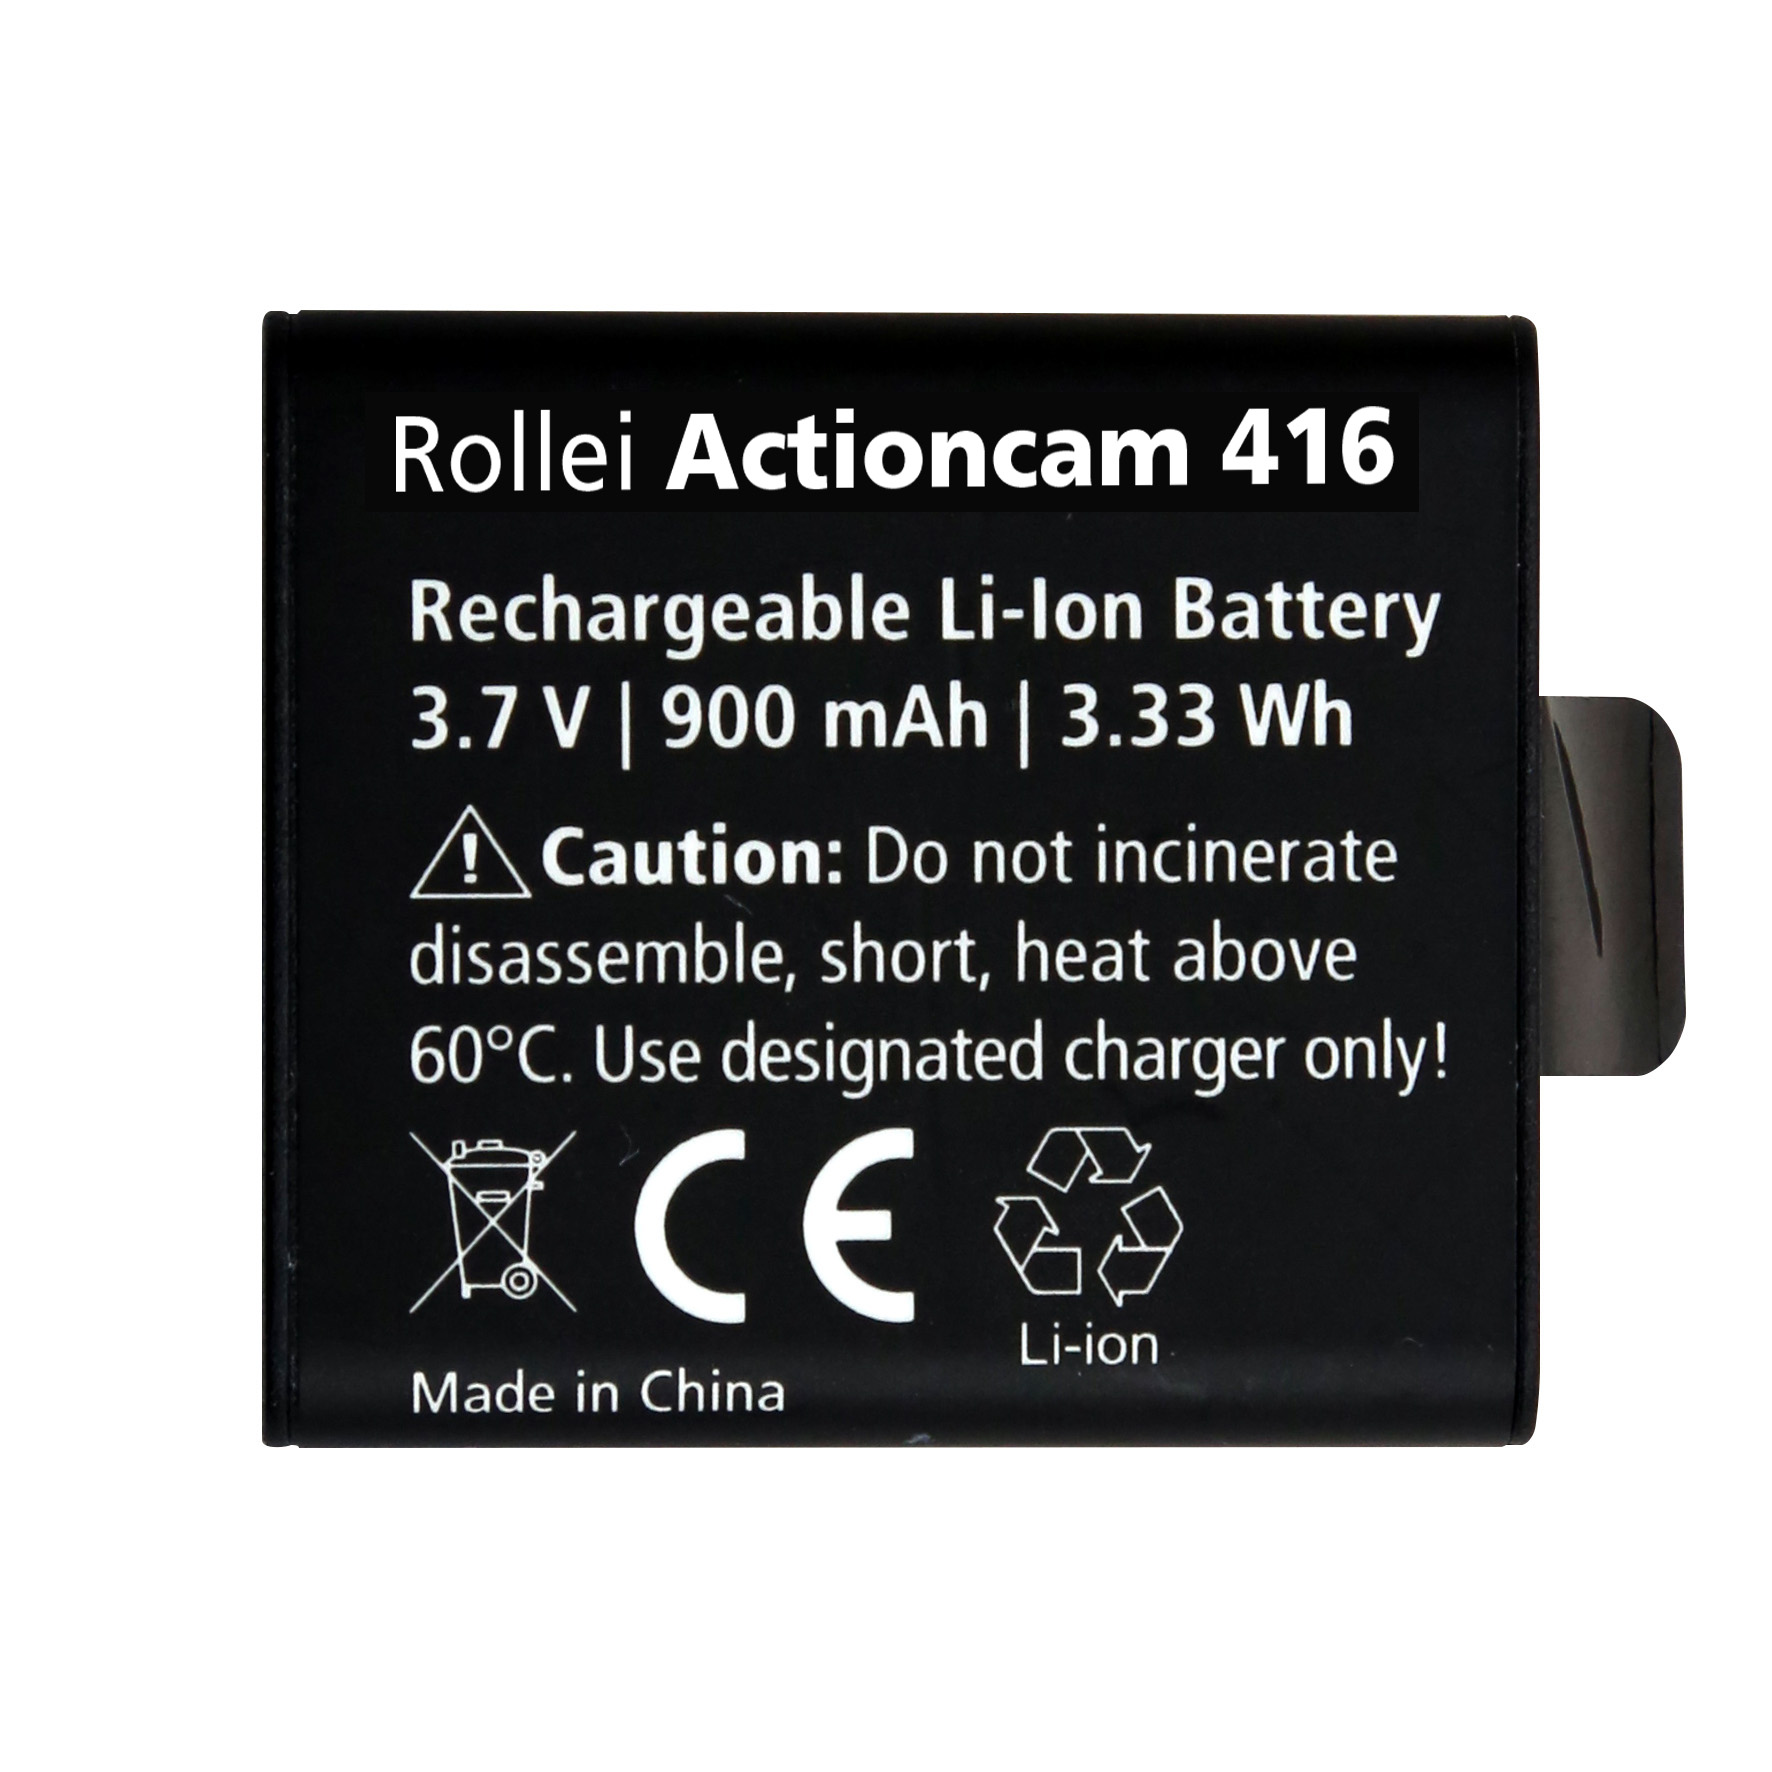 ROLLEI 416 Cam Action